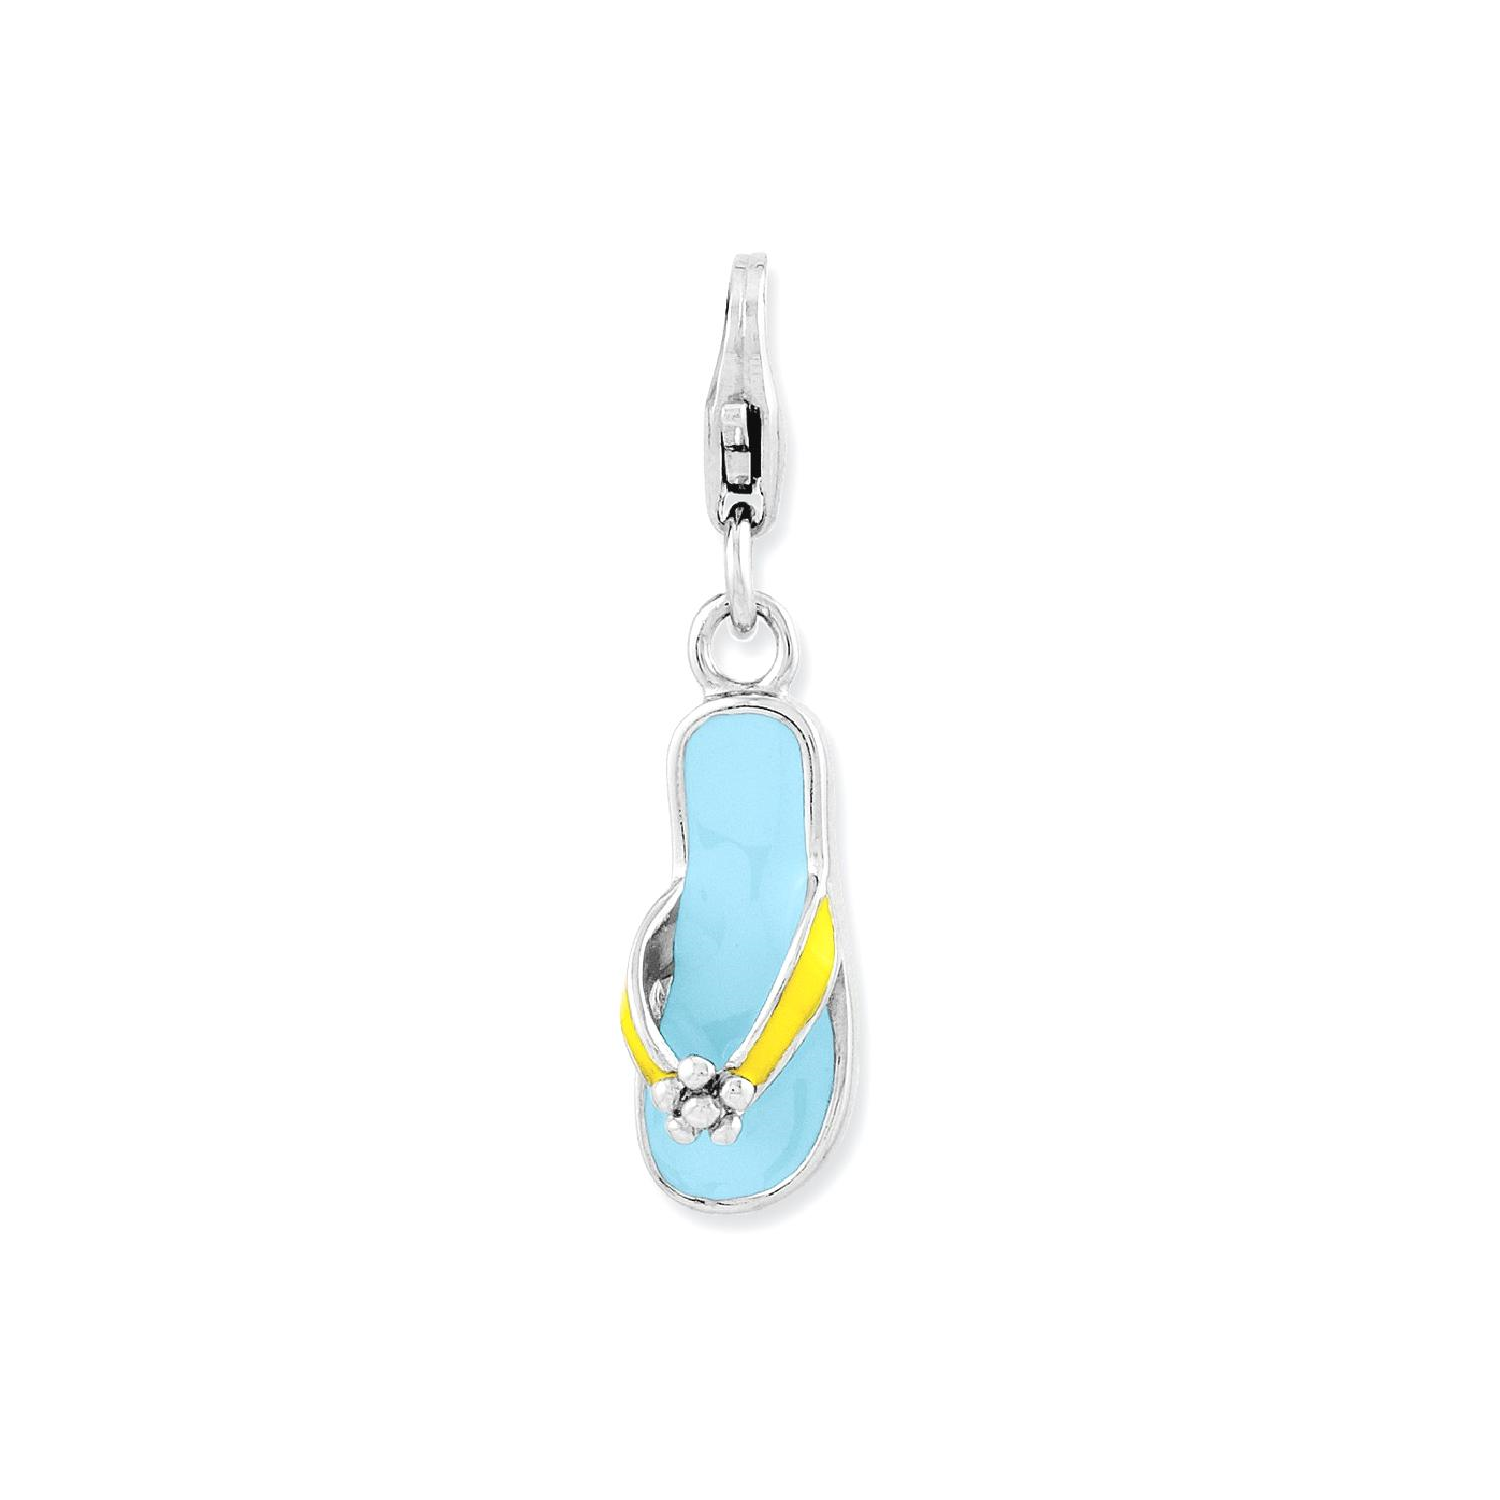 IceCarats 925 Sterling Silver Enameled 3 D Flower Flip Flop Lobster Clasp Pendant Charm Necklace Gardening